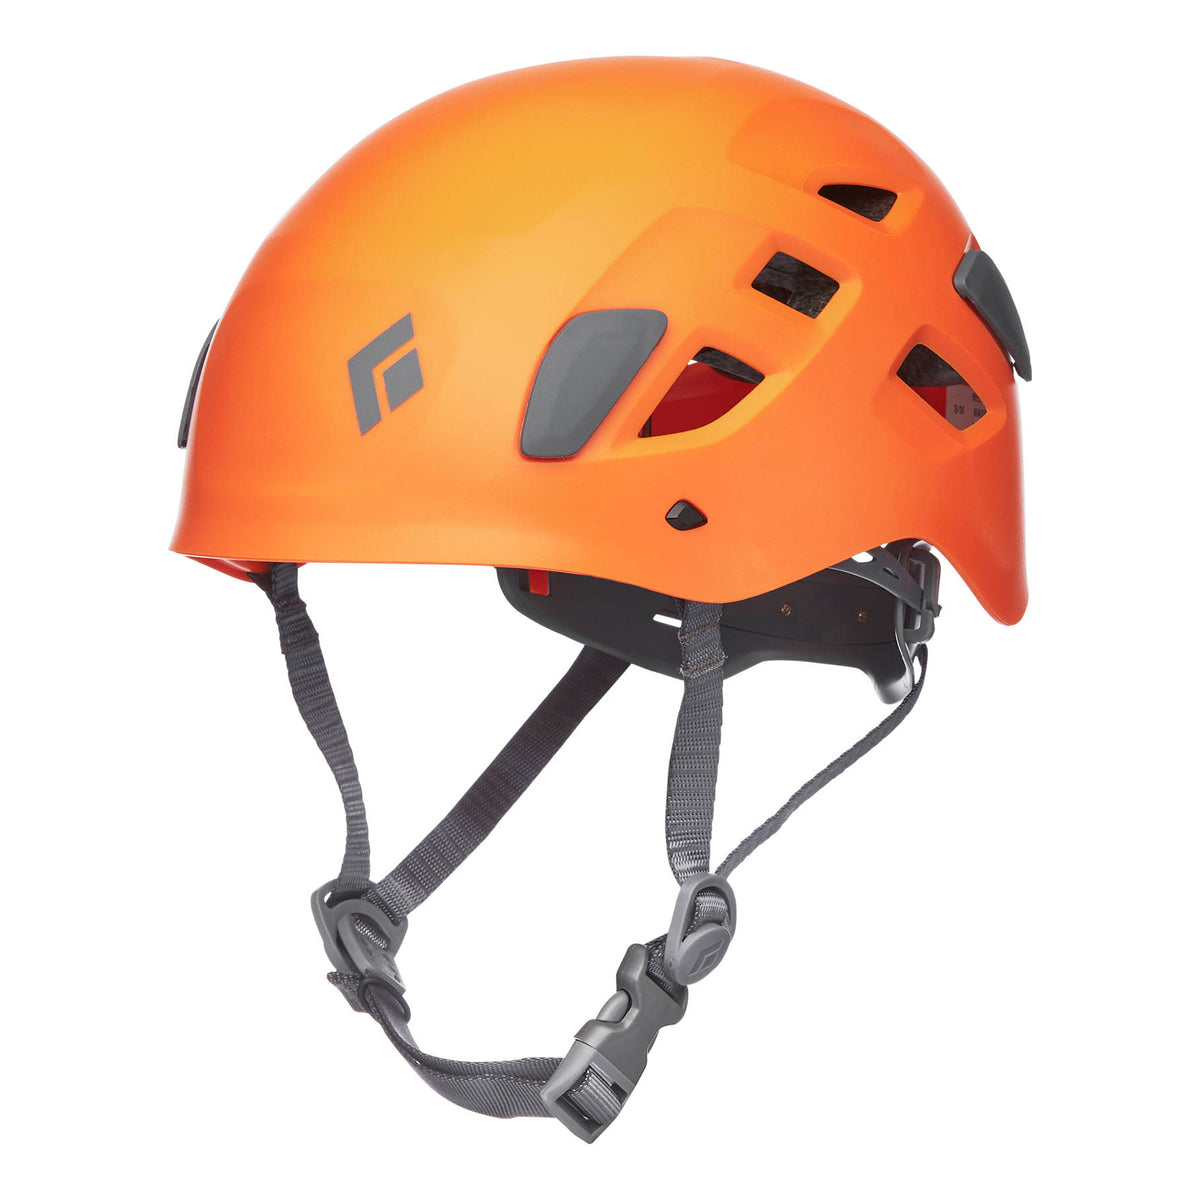 Black Diamond Half Dome climbing helmet, front/side view in orange colour with grey chin strap